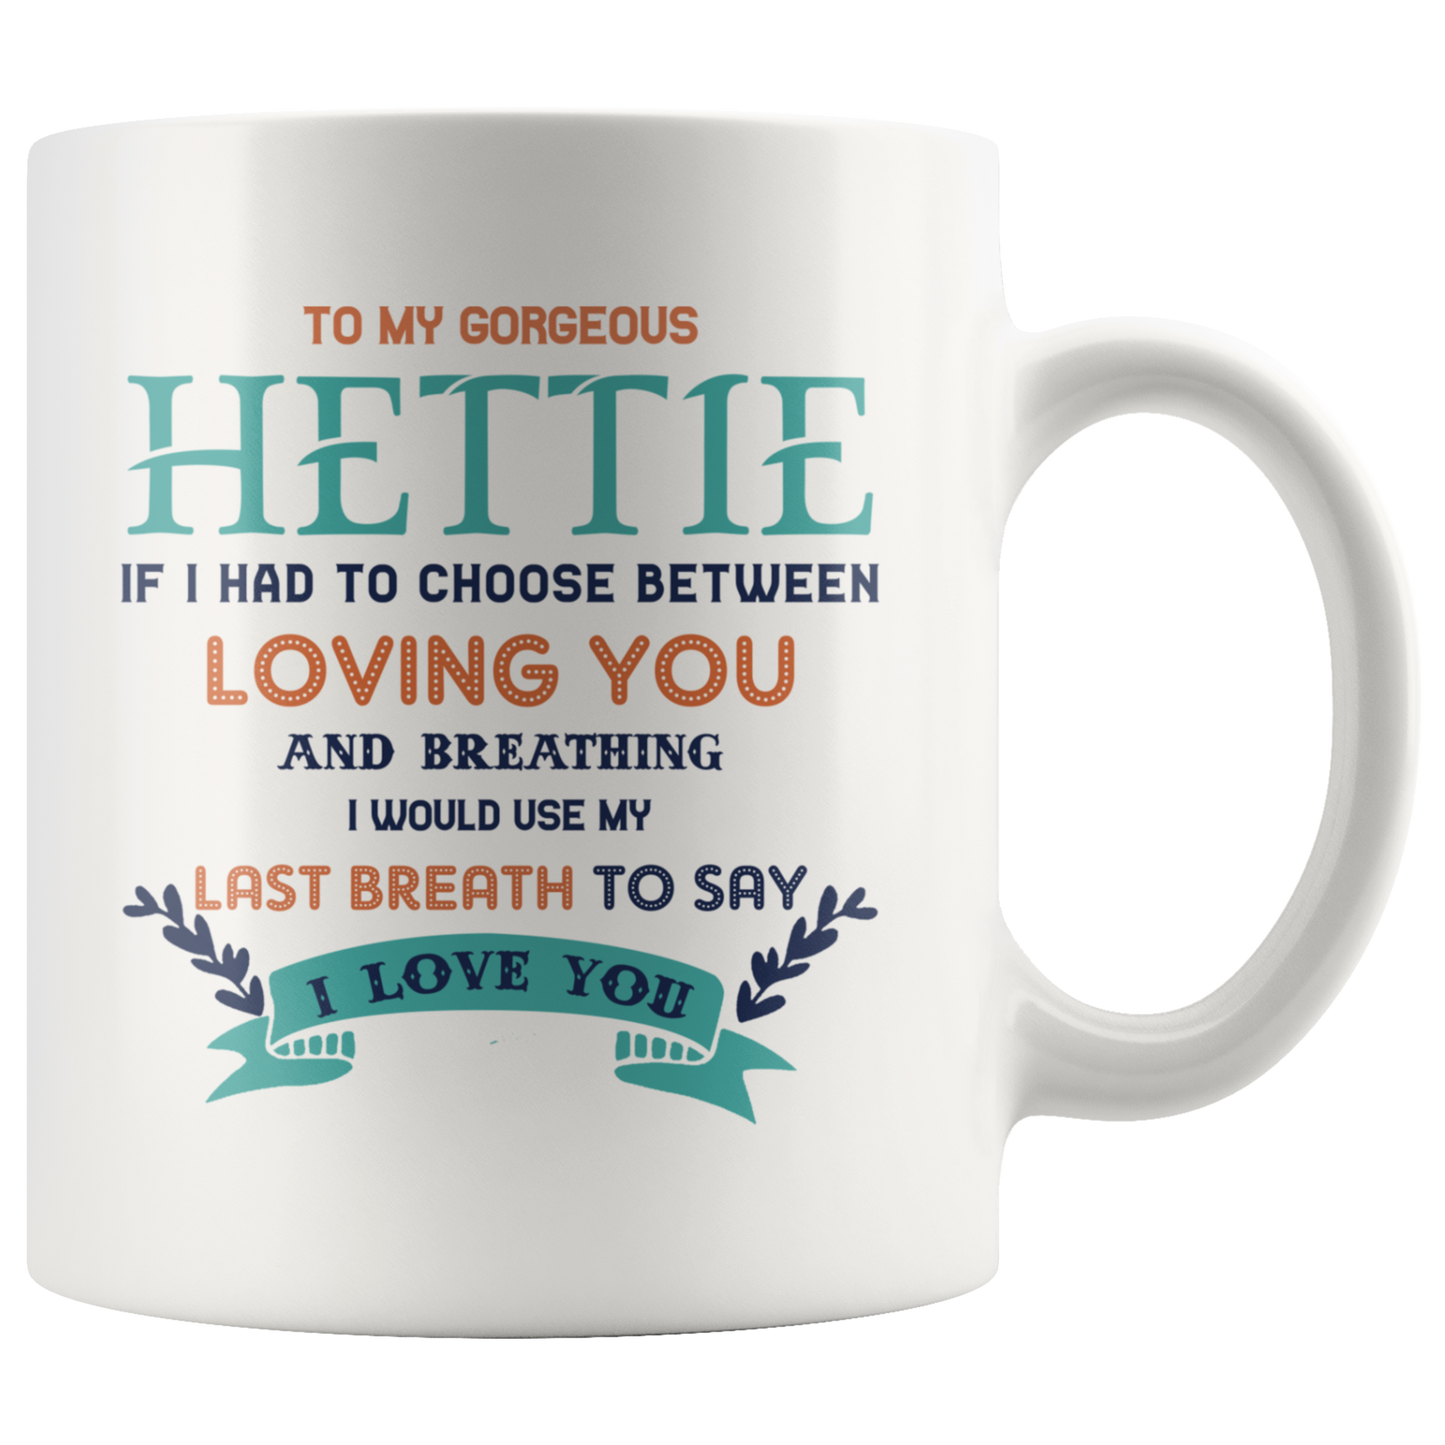 ND20394888-sp-24020 - [ Hettie | 1 ]Happy Christmas Gift For Wife From Husband Coffee Mug 11oz -